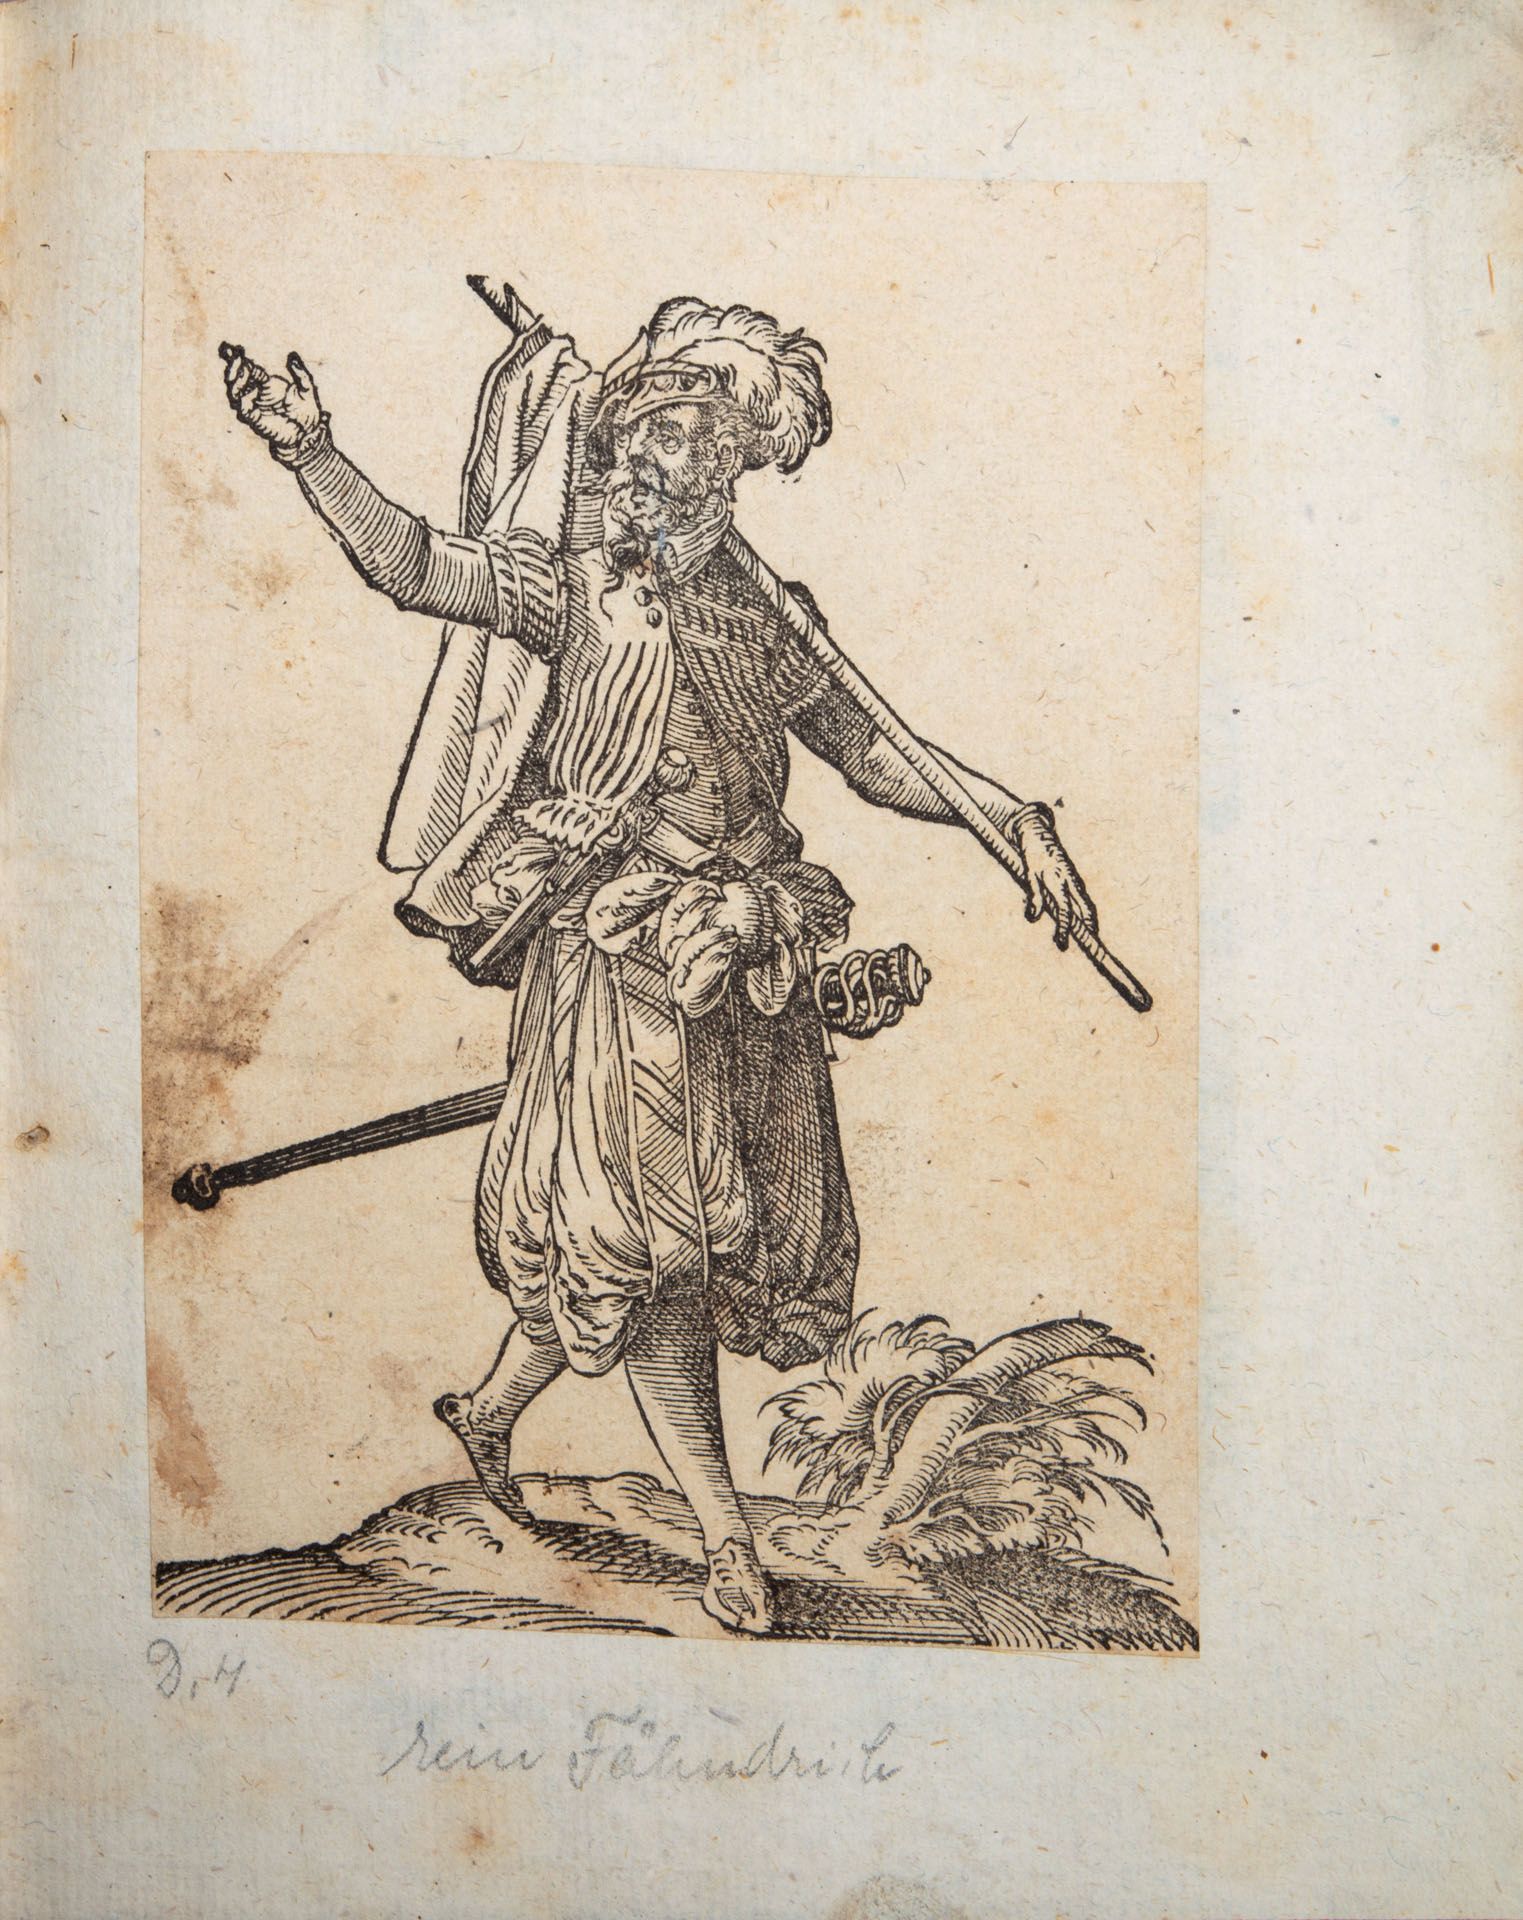 Jost Amman (1539-1591), An Album of 32 Original Engraving from the 16th Century - Image 4 of 7